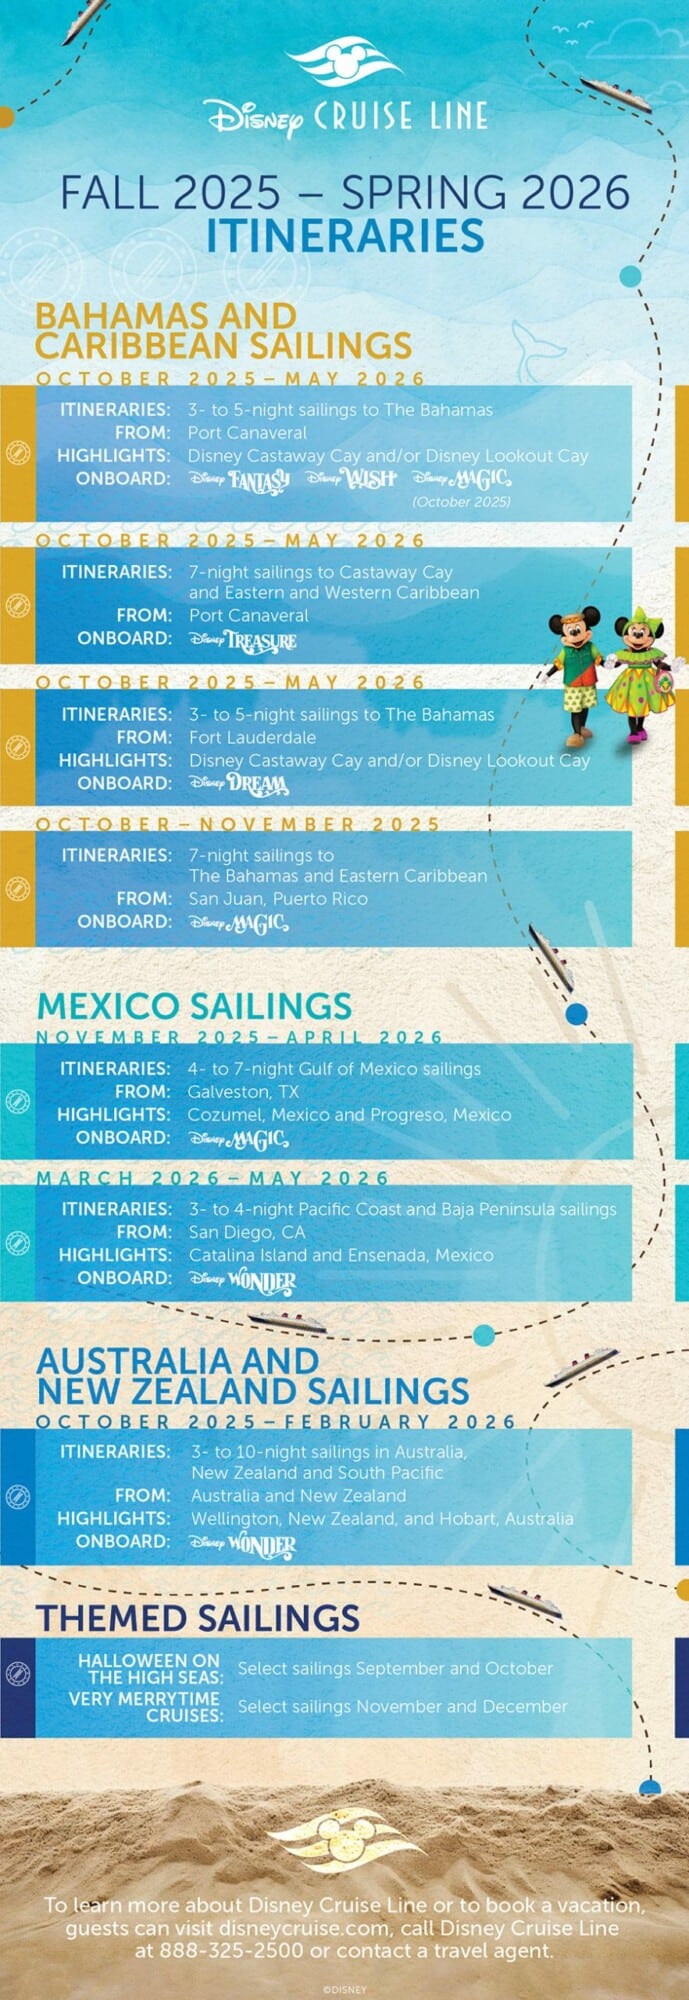 Two Seasons of Disney Cruise Line Sailings Infographic